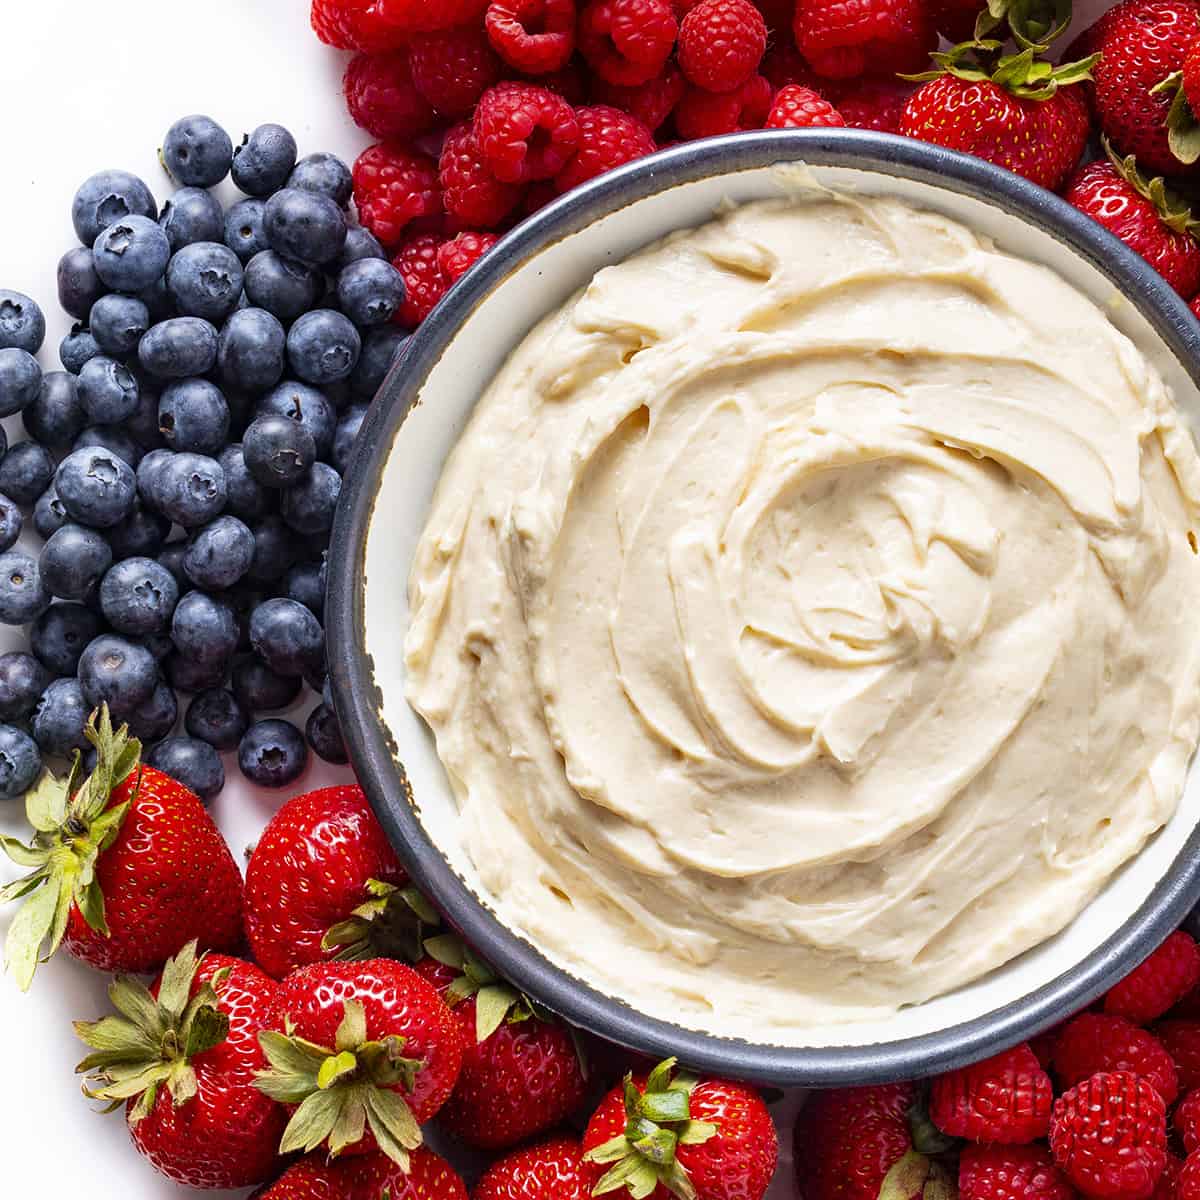 Healthy fruit dip in a bowl next to berries.